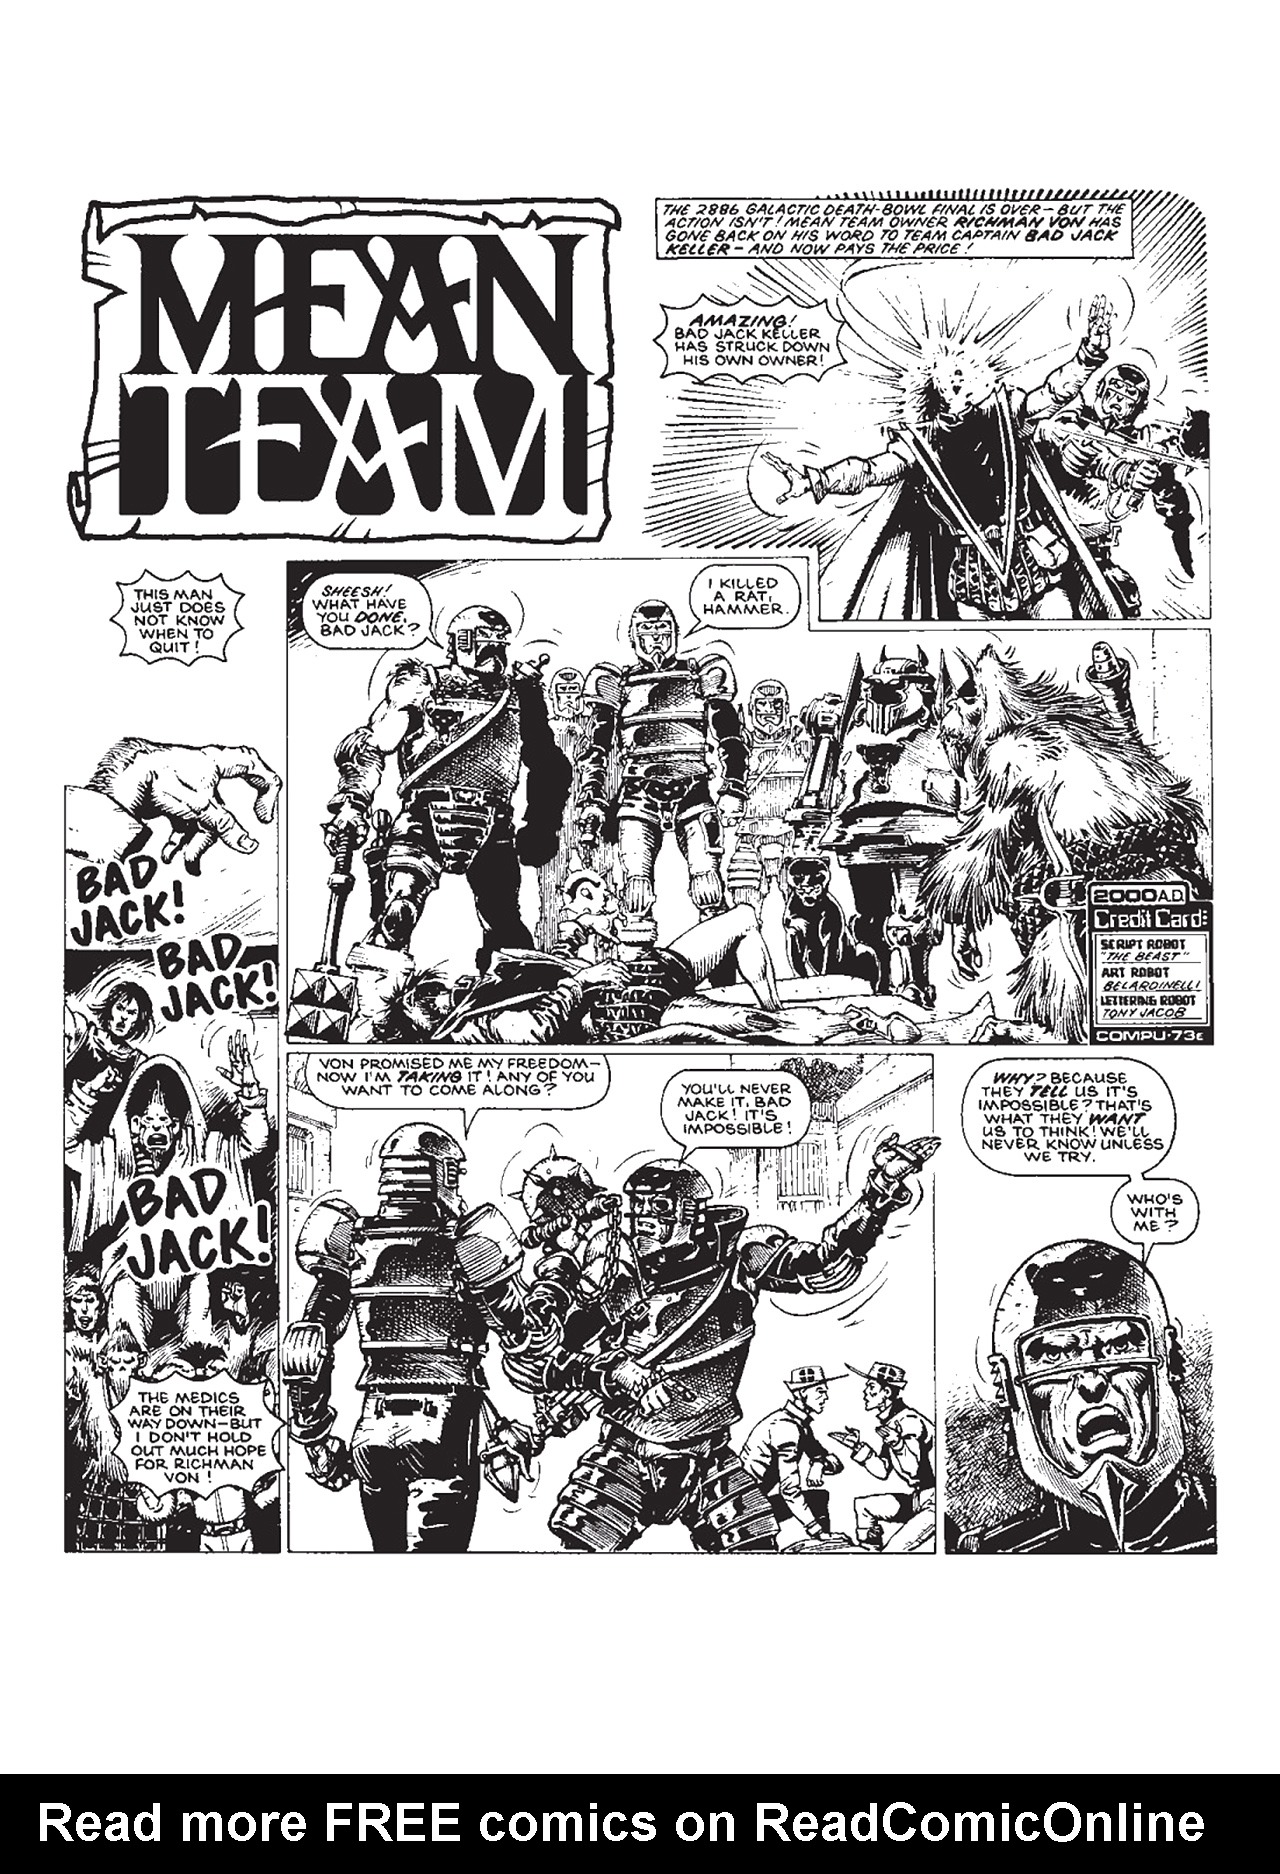 Read online Mean Team comic -  Issue # TPB - 92